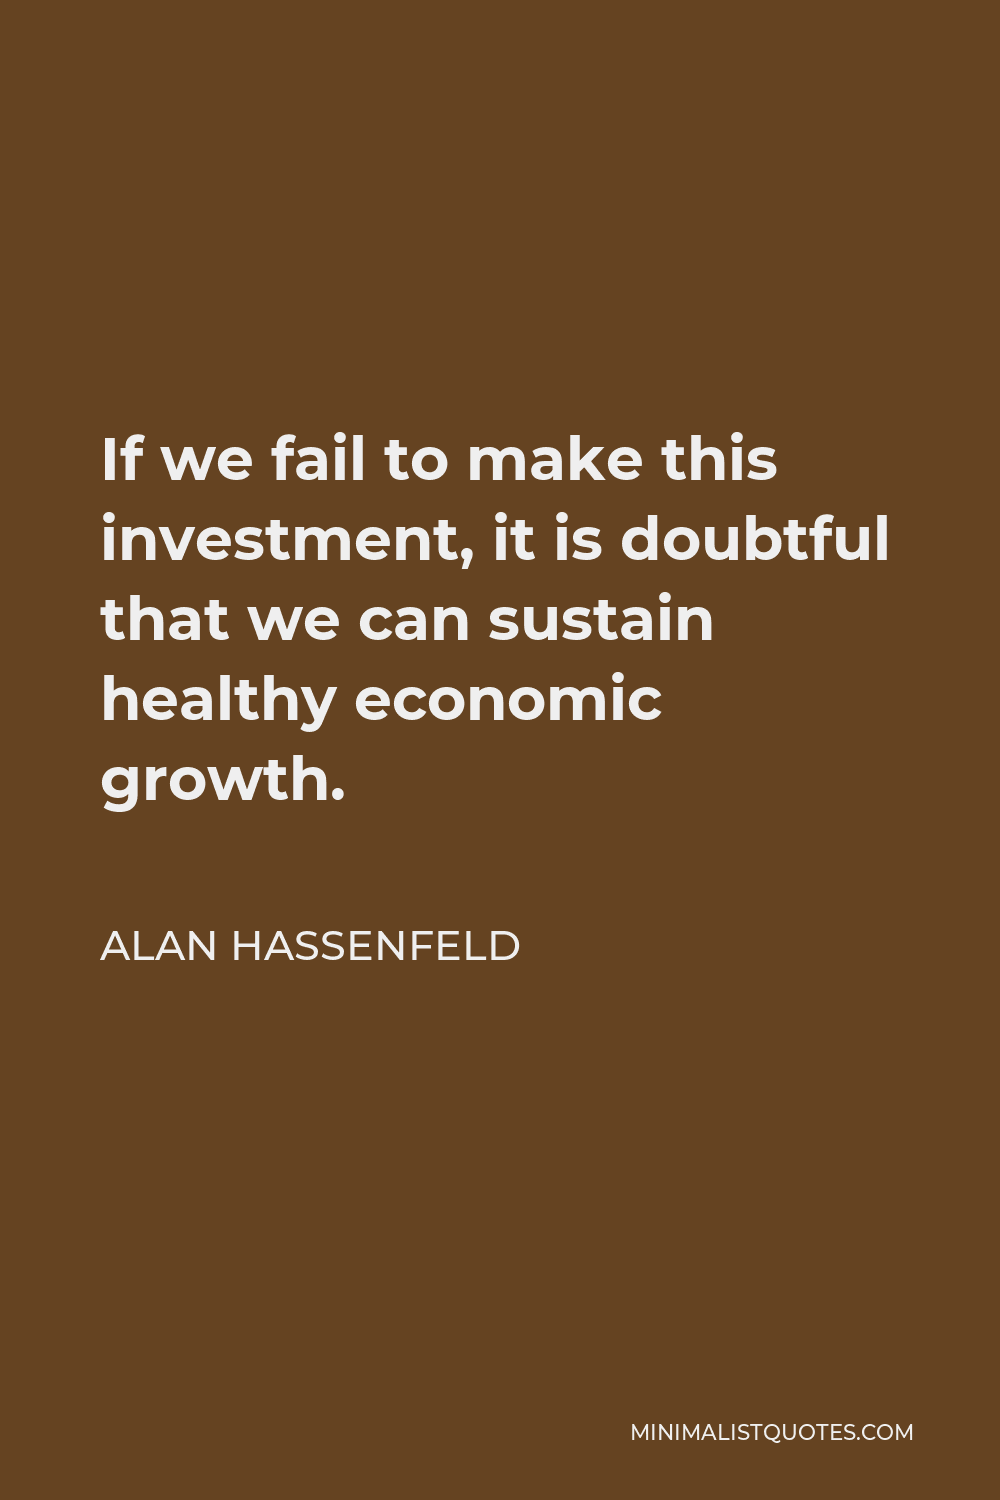 Alan Hassenfeld Quote - If we fail to make this investment, it is doubtful that we can sustain healthy economic growth.